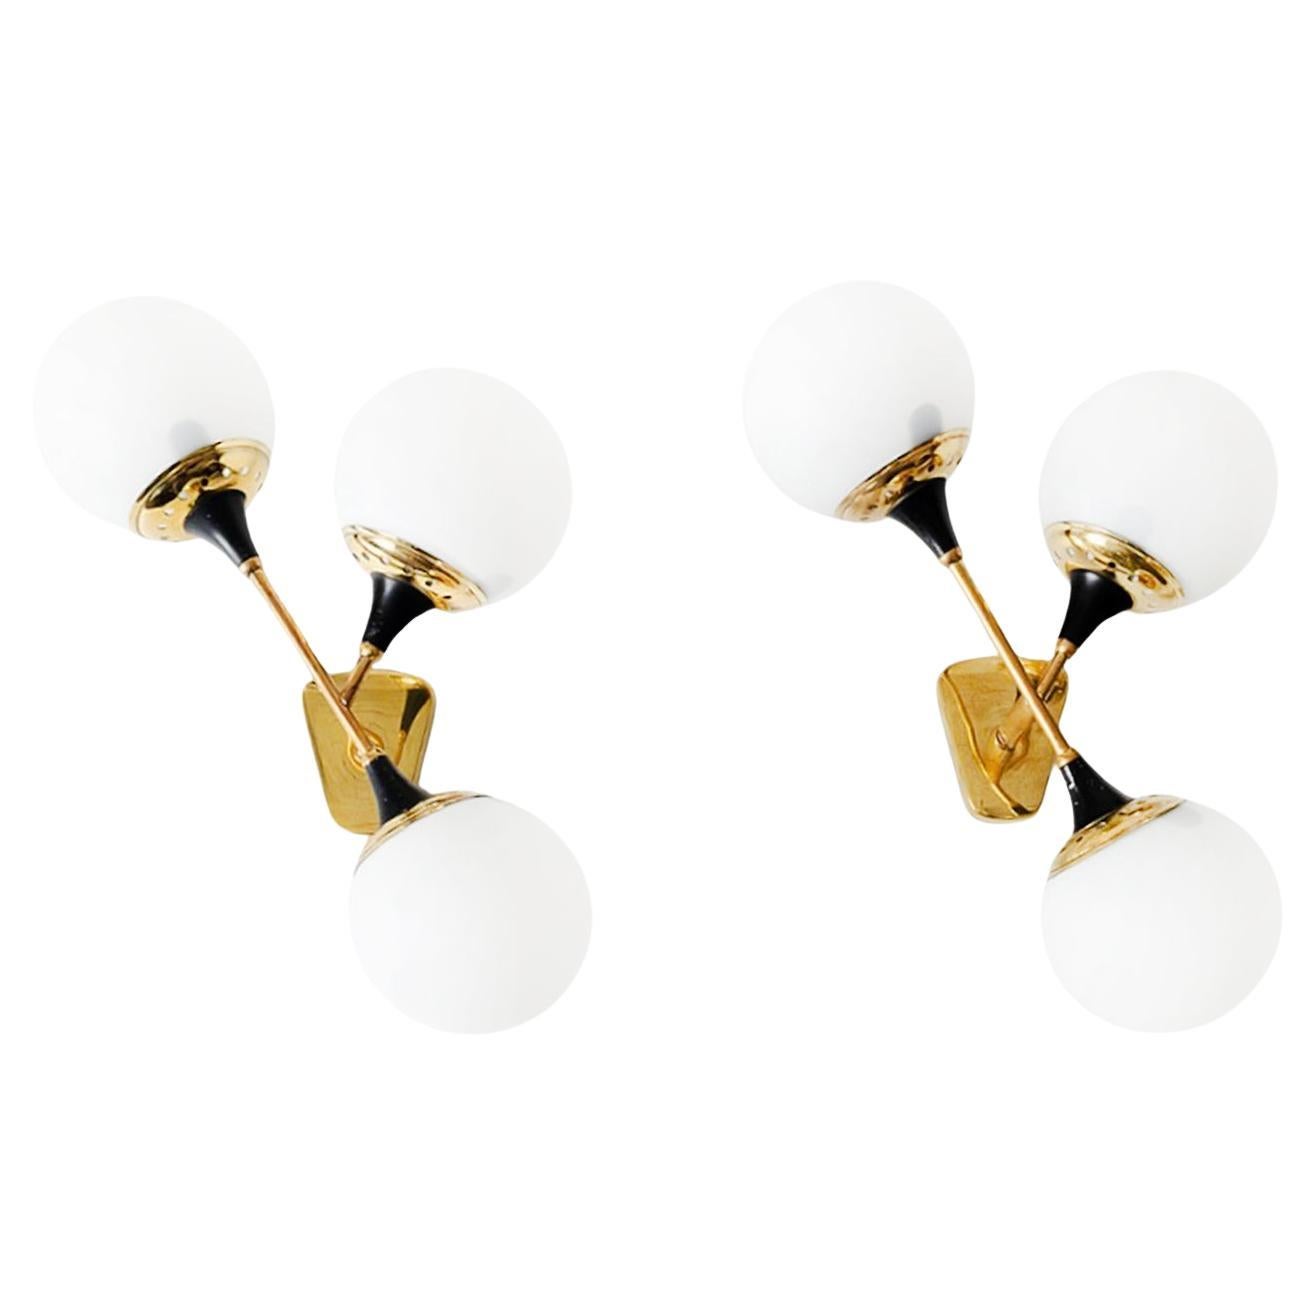 20th Century Italian Modern Pair of Vintage Opaline Glass Wall Lamps by Stilnovo For Sale